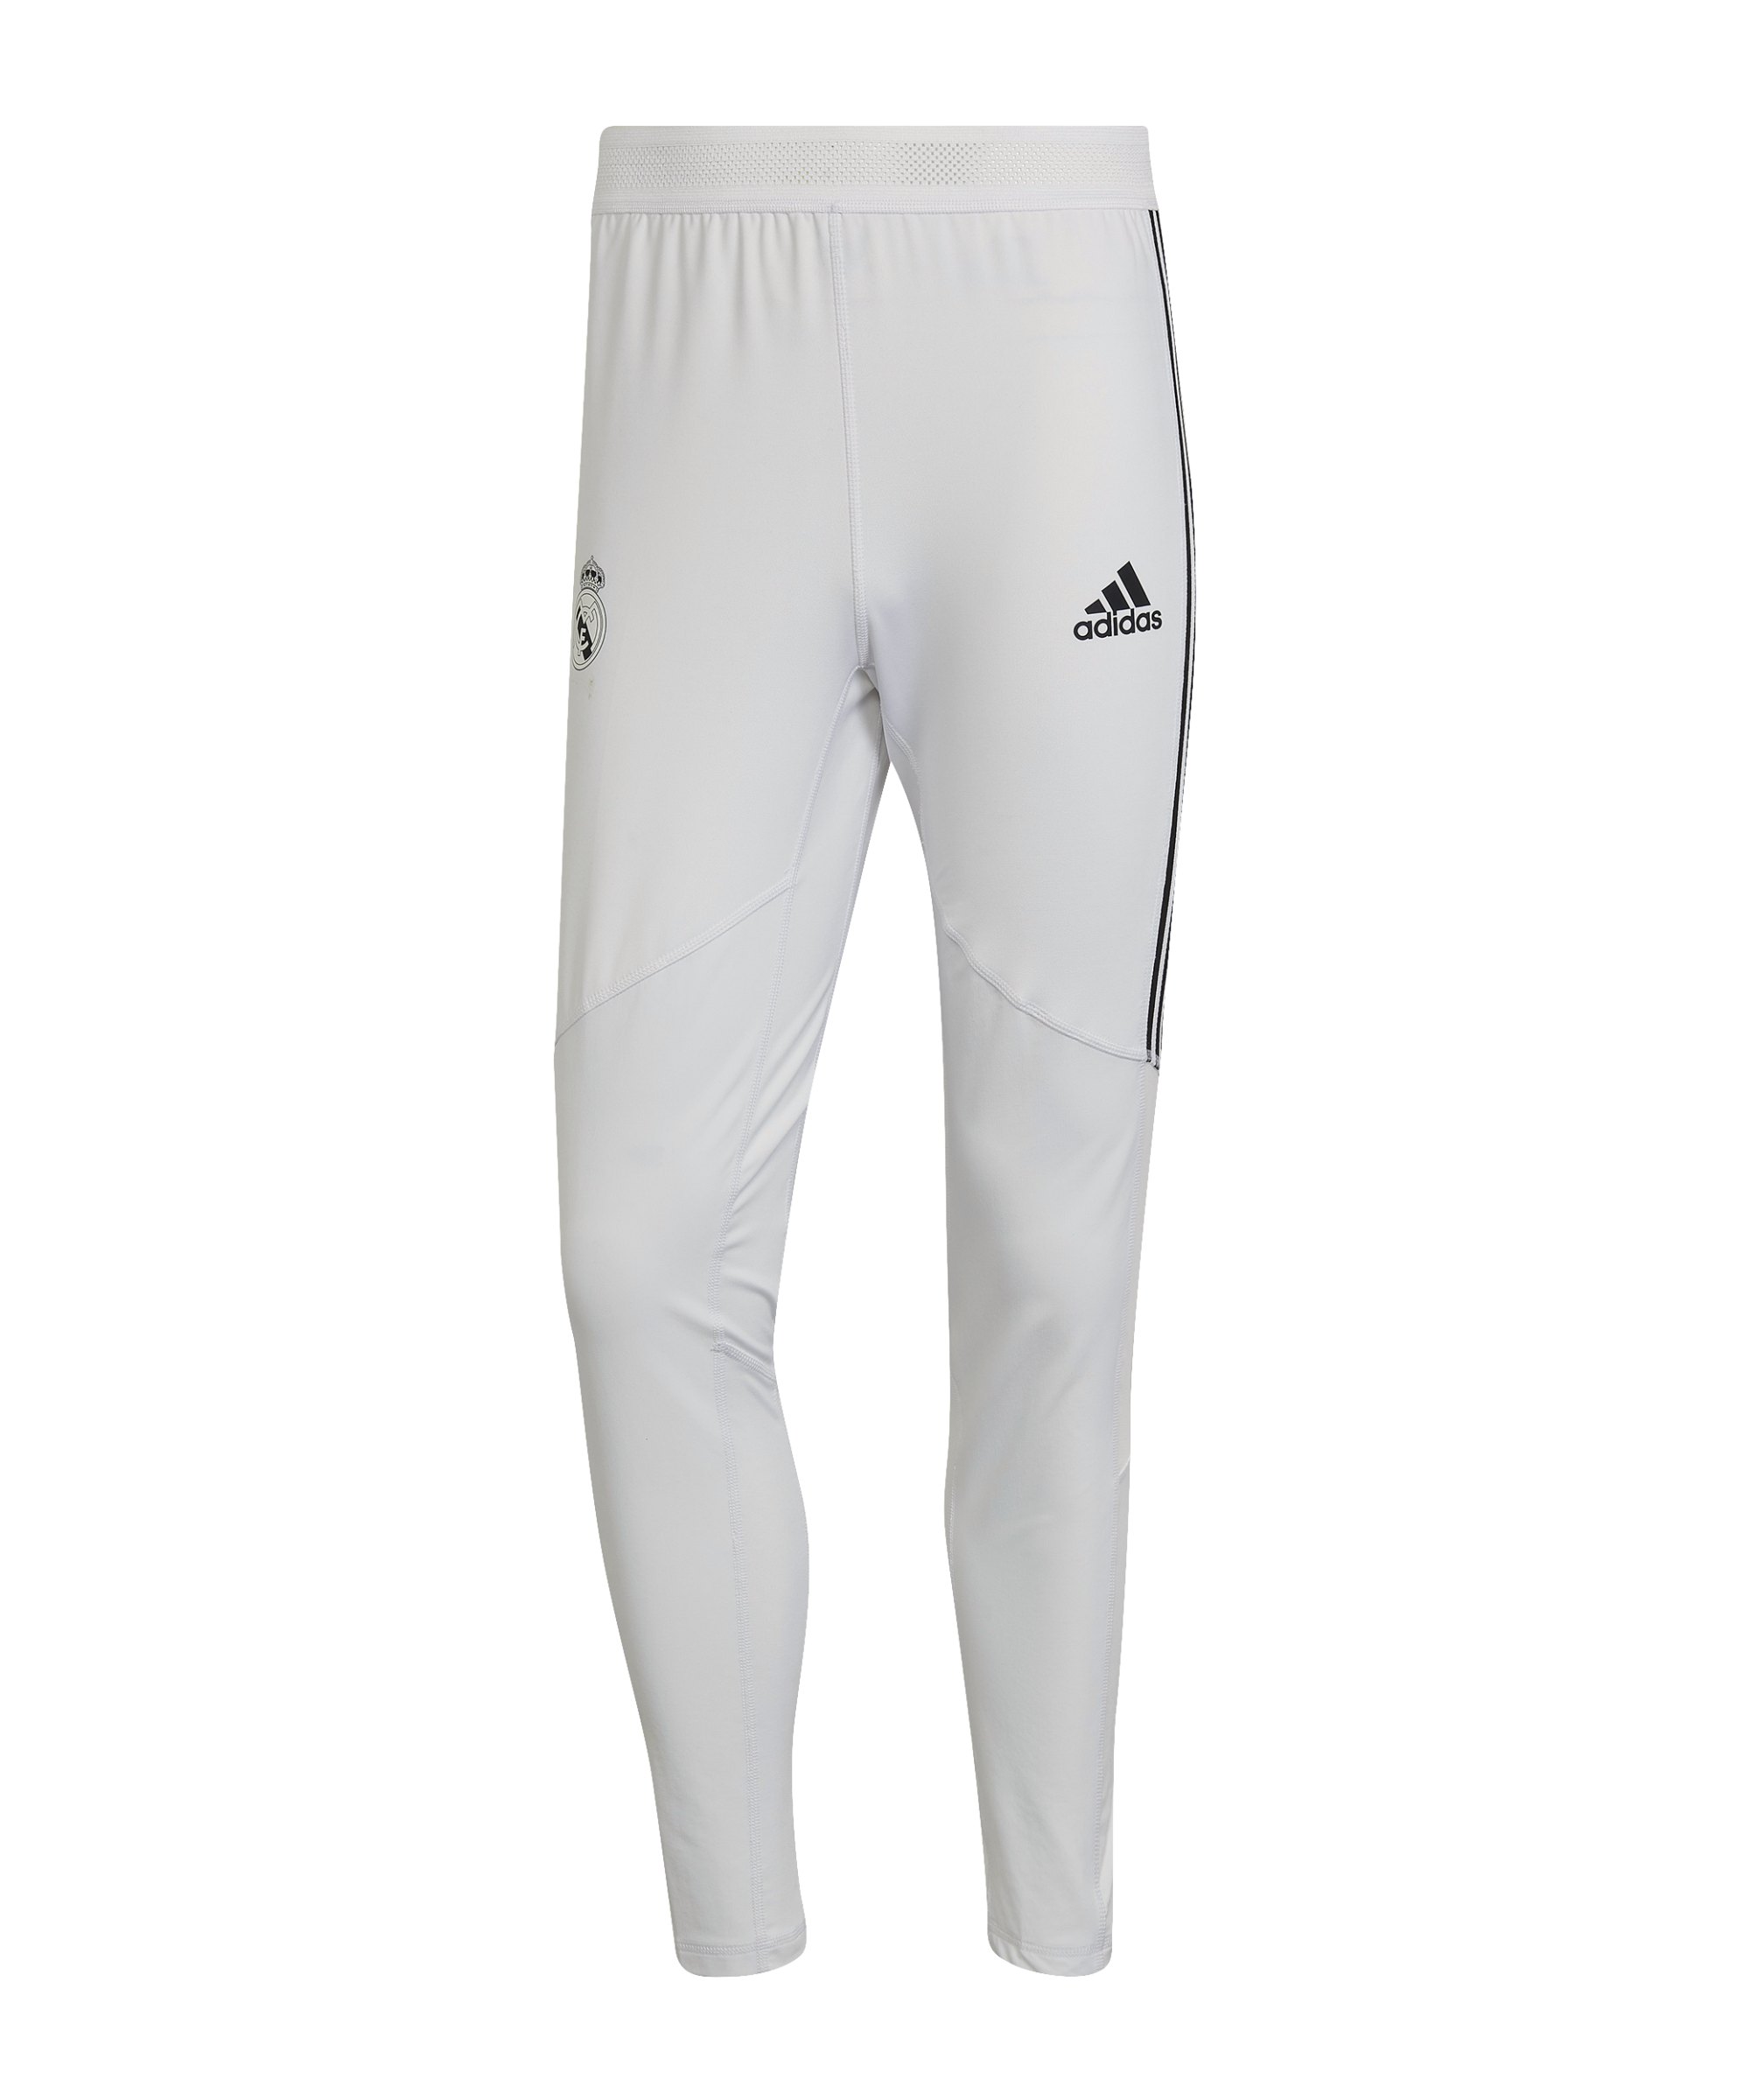 adidas Real Madrid Pro Trainingshose Weiss - weiss